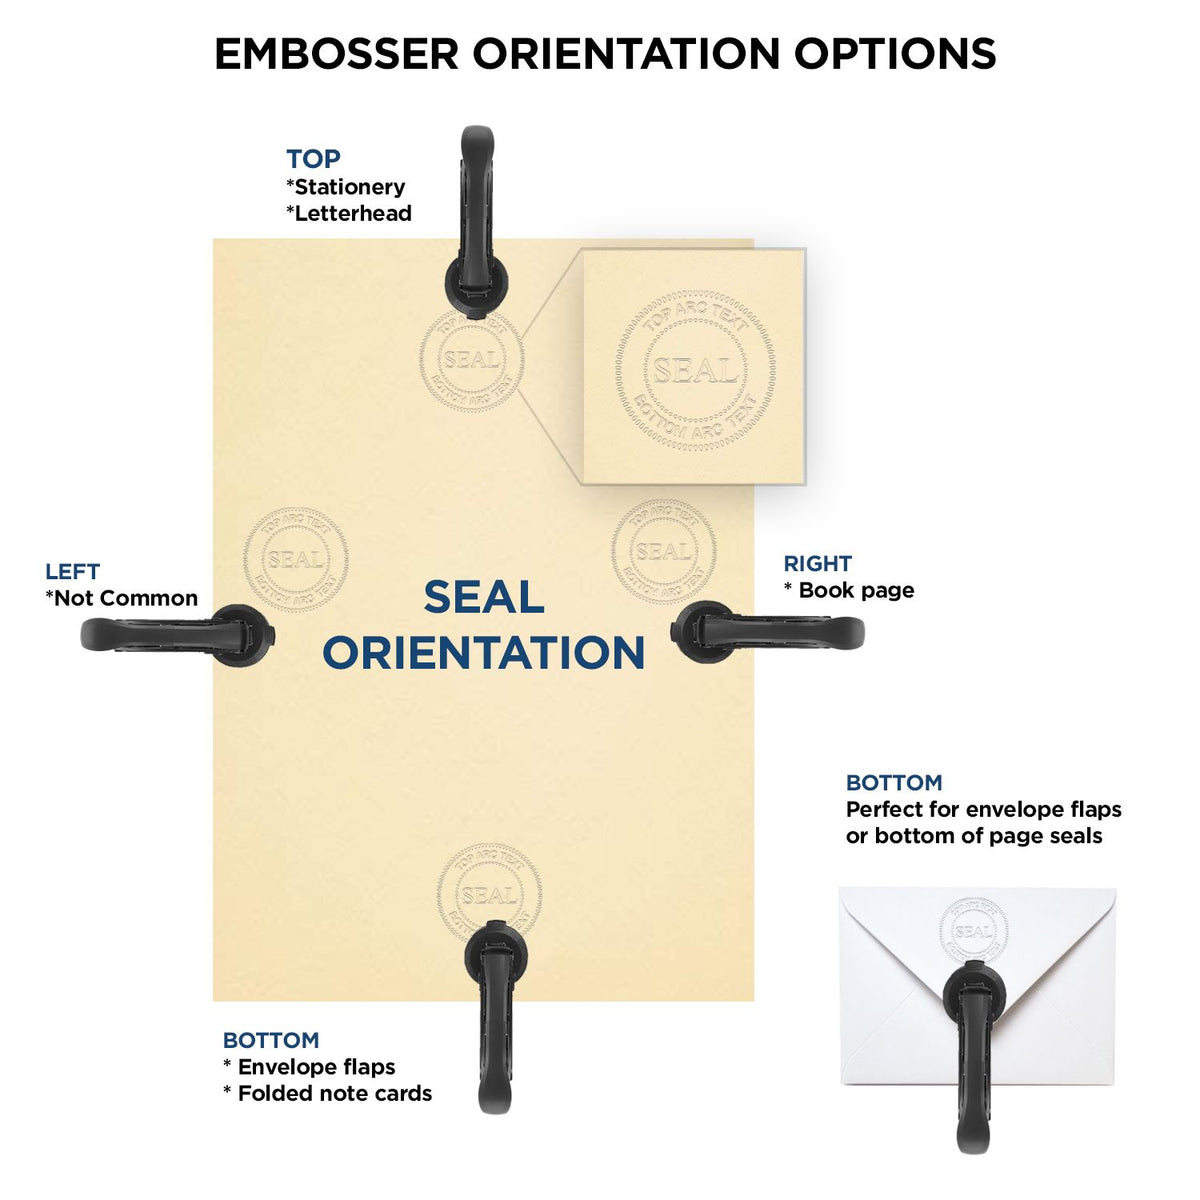 An infographic for the Wyoming Geologist Desk Seal showing embosser orientation, this is showing examples of a top, bottom, right and left insert.